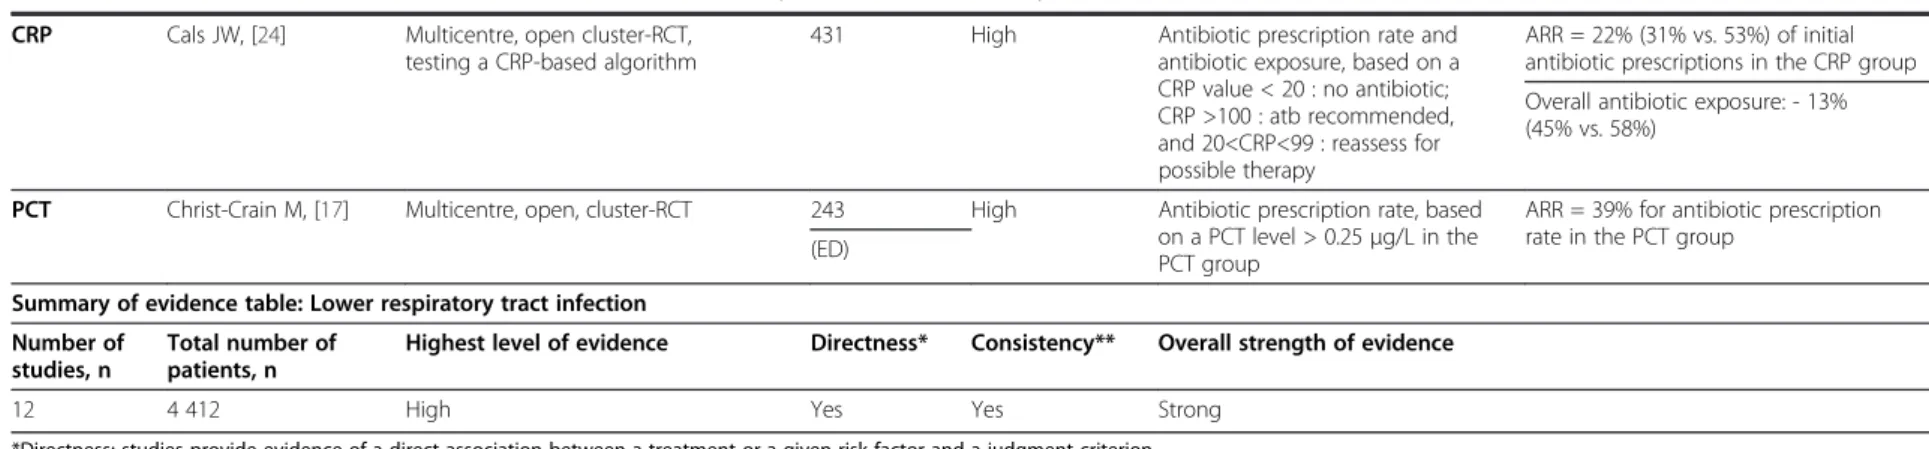 Table 2 Role of biomarkers in the initiation of antibiotic therapy for lower respiratory tract infection (Continued) CRP Cals JW, [24] Multicentre, open cluster-RCT,